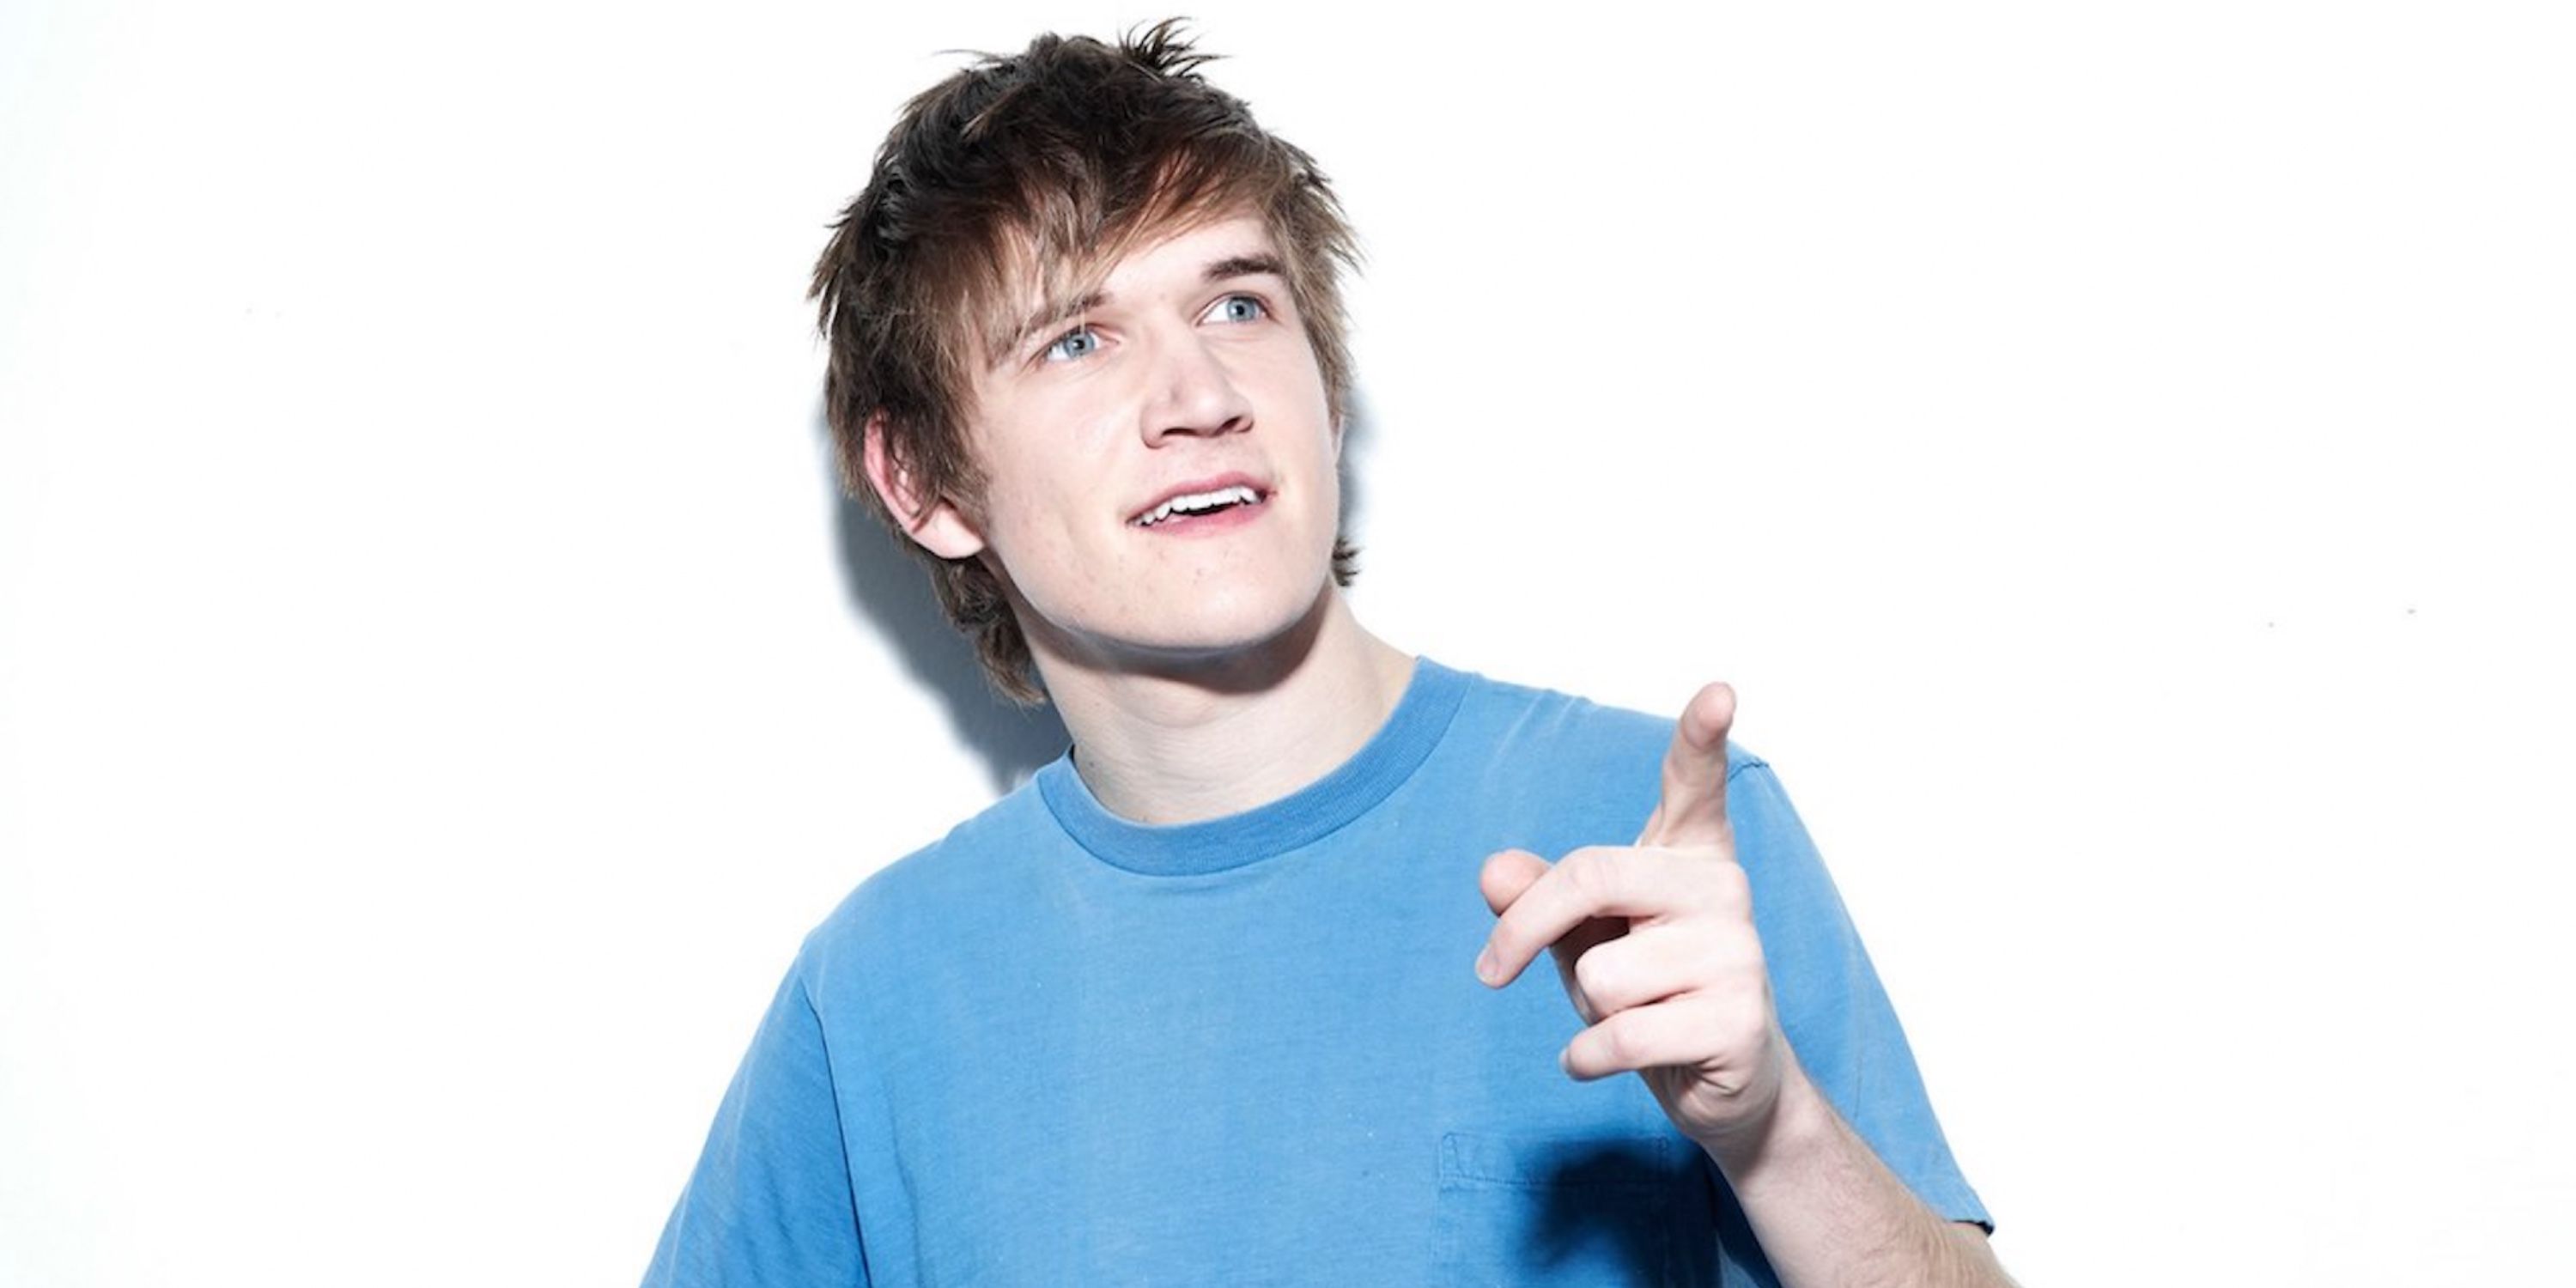 Every Bo Burnham StandUp Comedy Special & Where To Watch